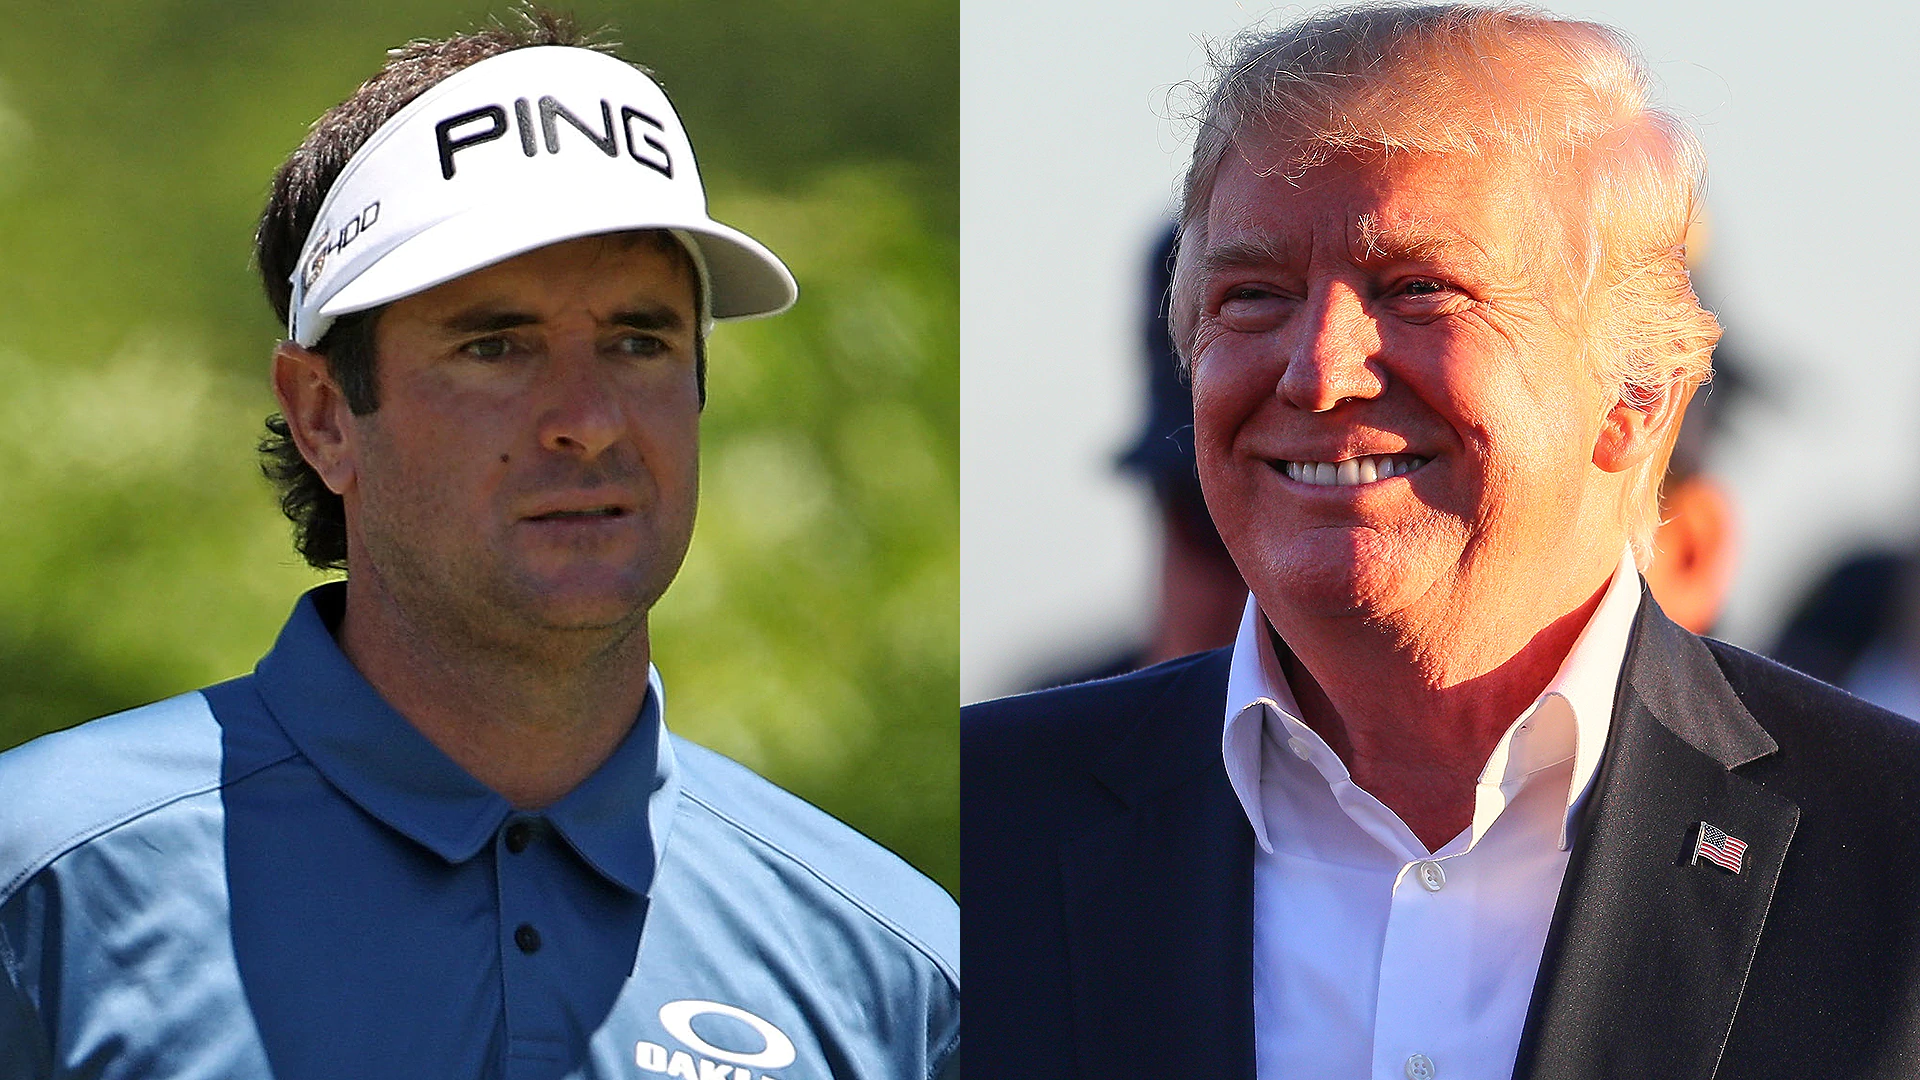 Bubba: I would never tank against Trump